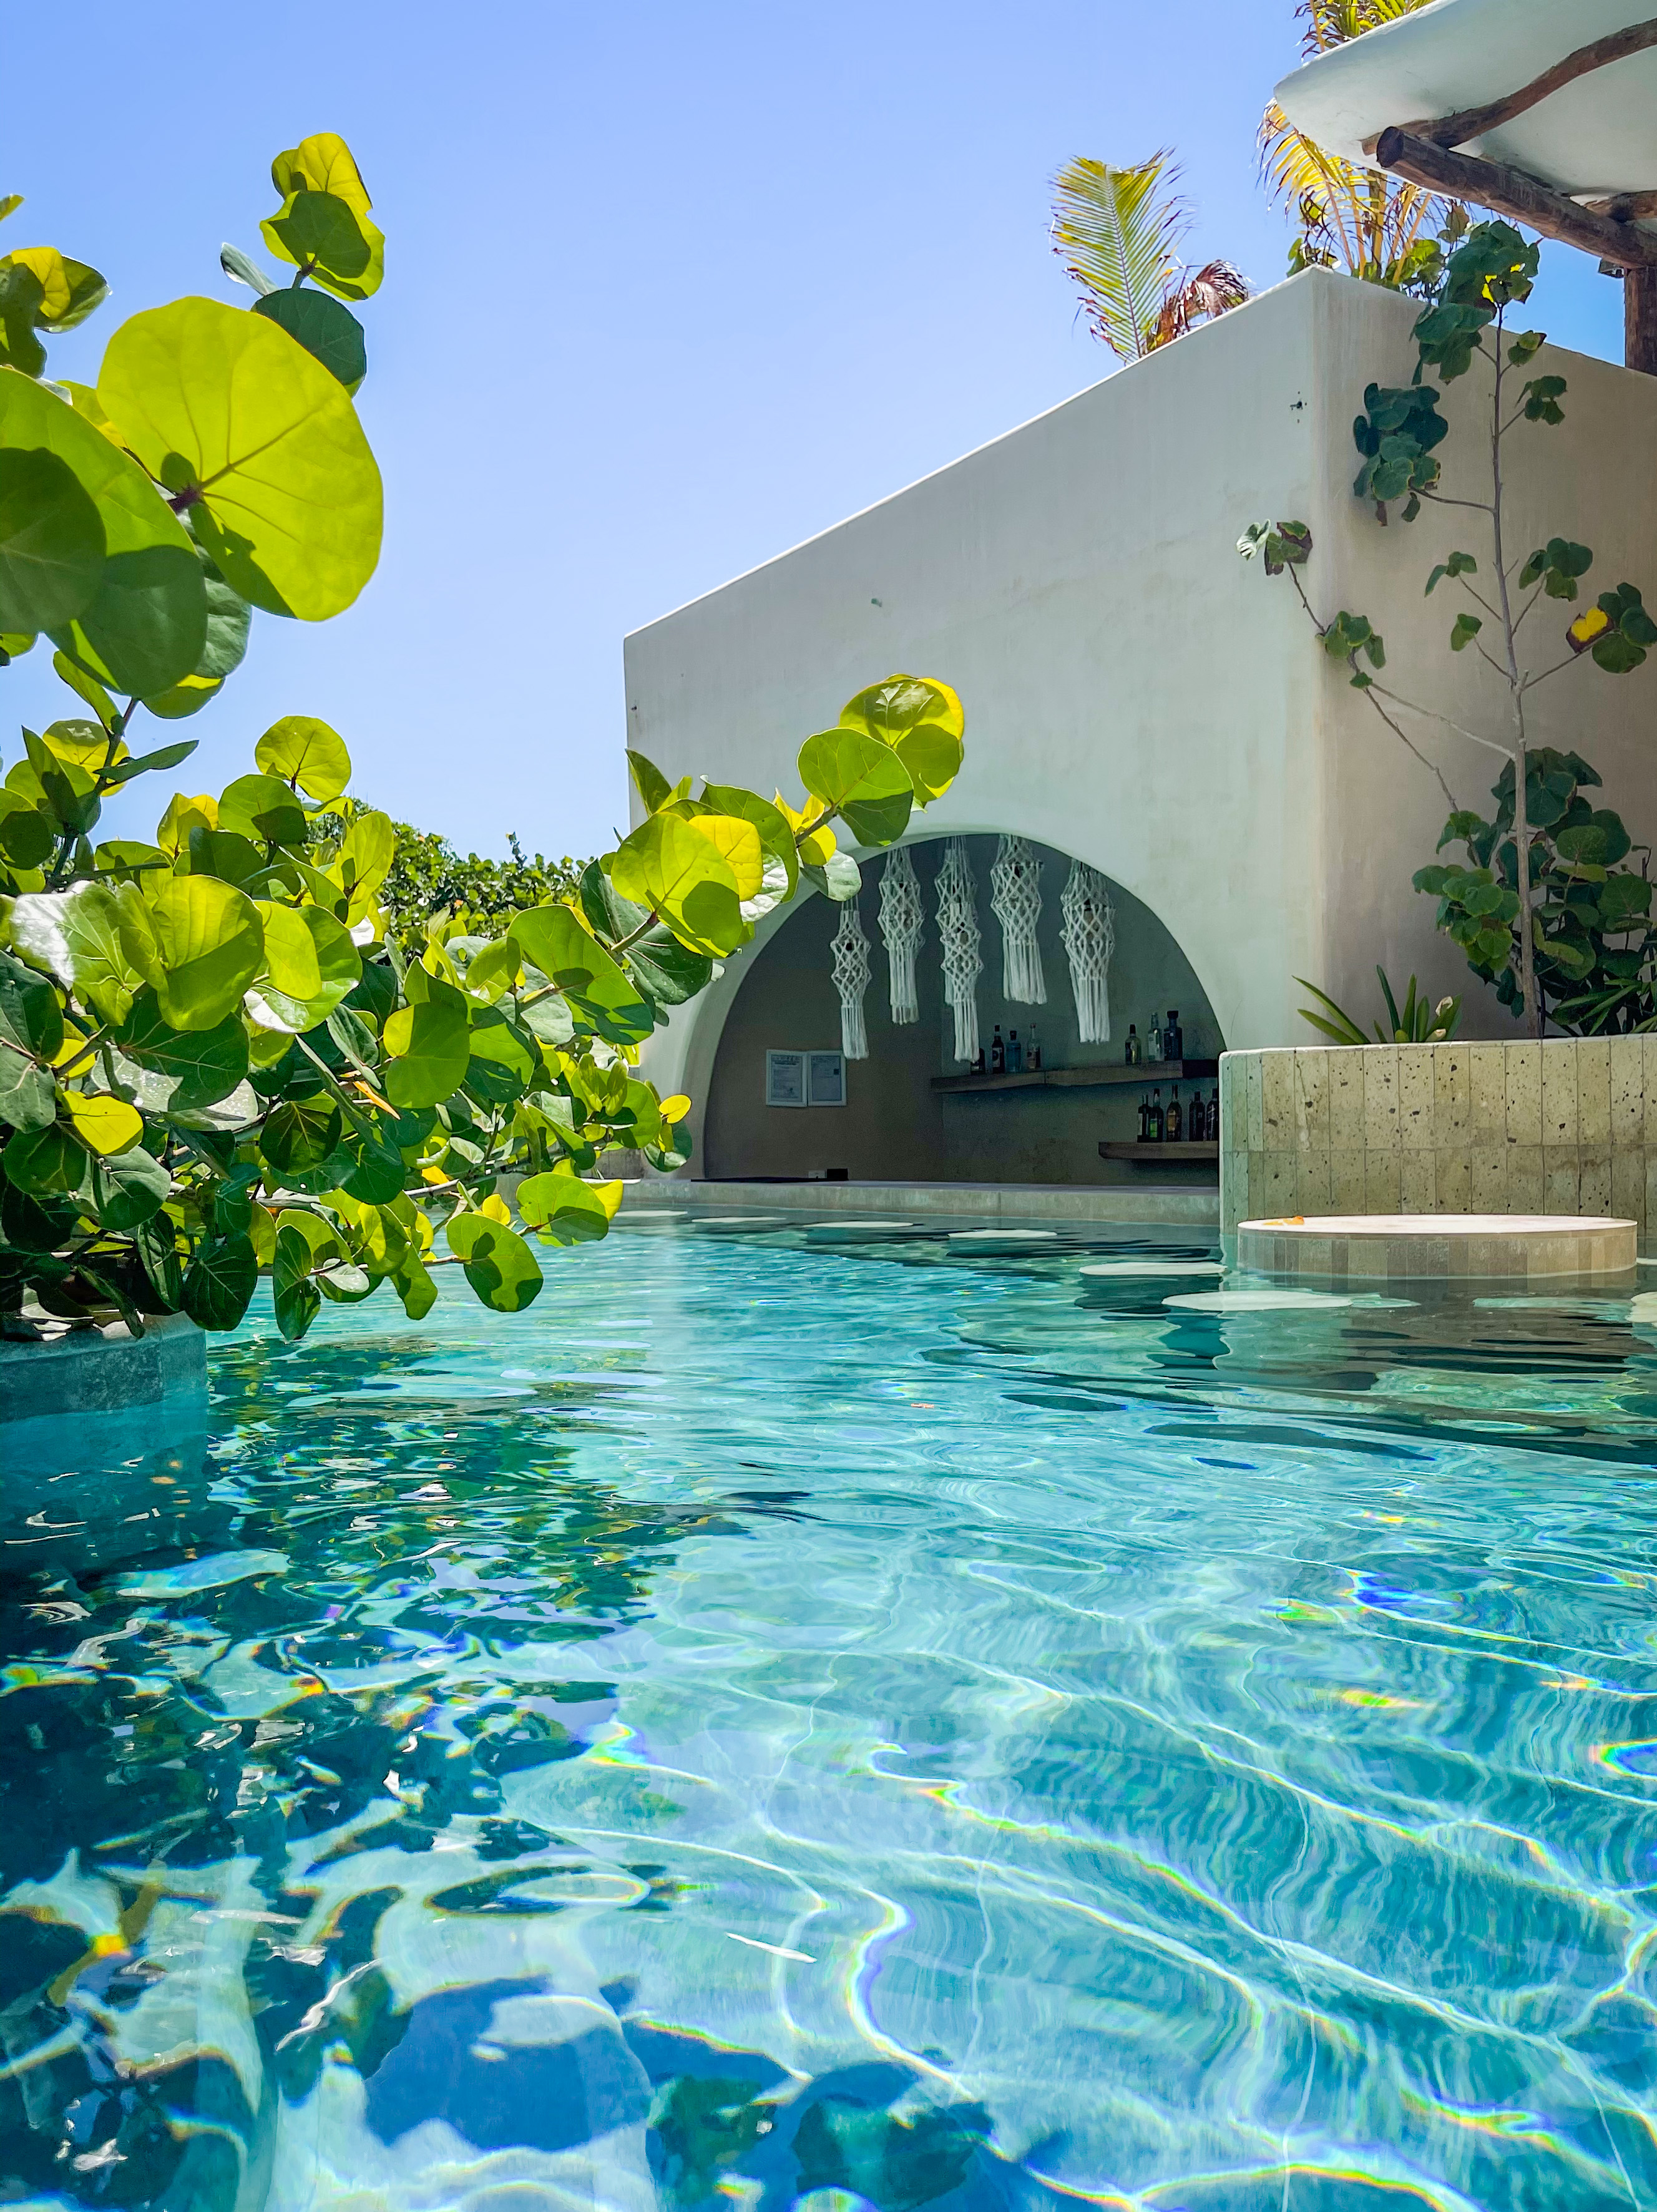 Palmaia, The House of Aia Playa Del Carmen. Photo by Compass + Twine